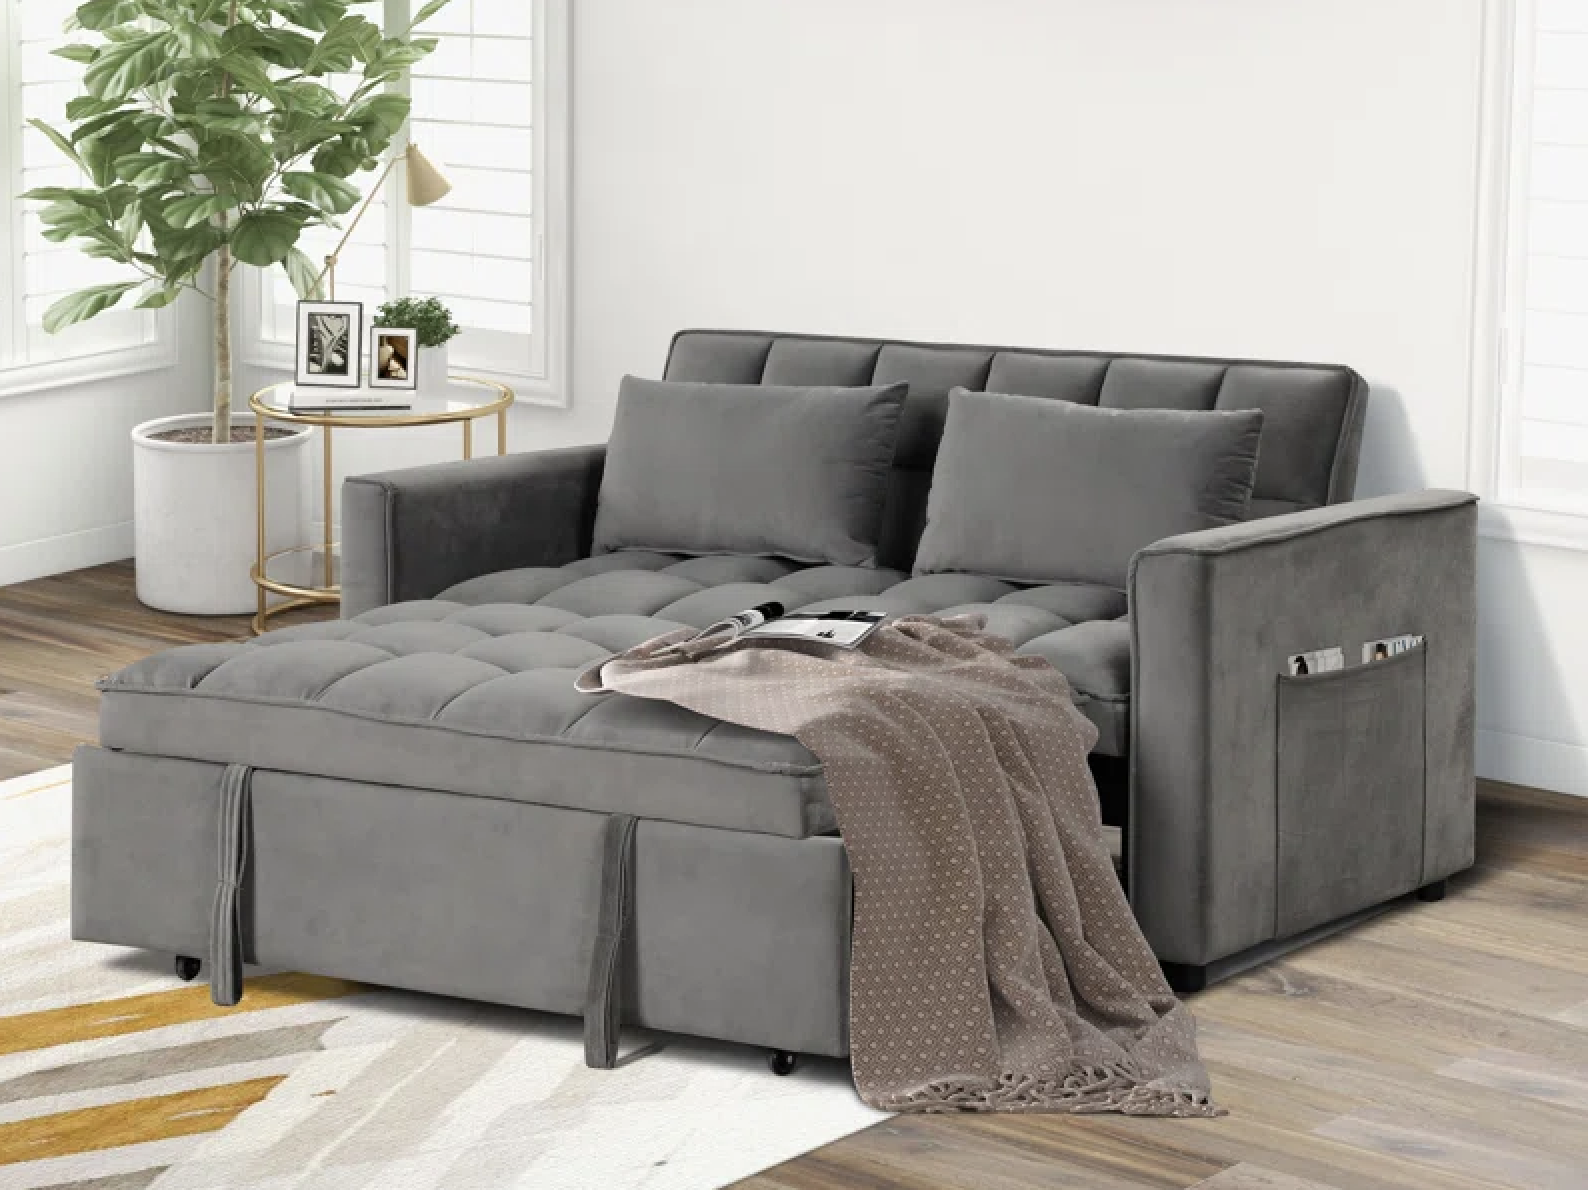 Wide Convertible Velvet Sleeper Sofa Bed with Reclining Backrest and 2 Throw Pillows